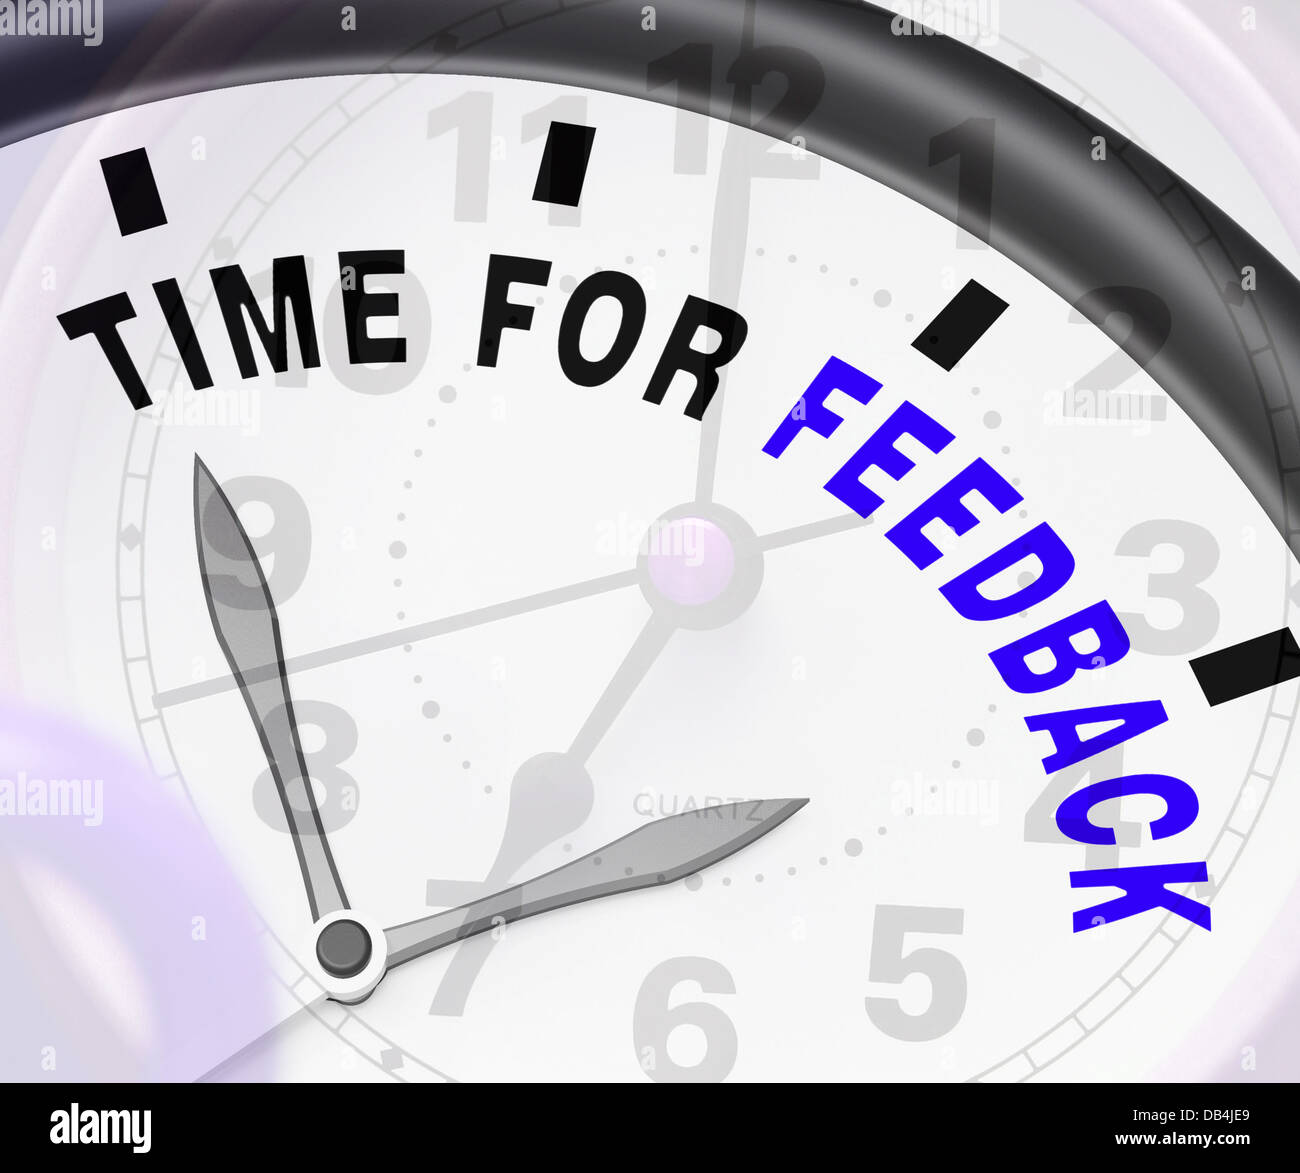 Time For feedback Showing Opinion Evaluation And Surveys Stock Photo